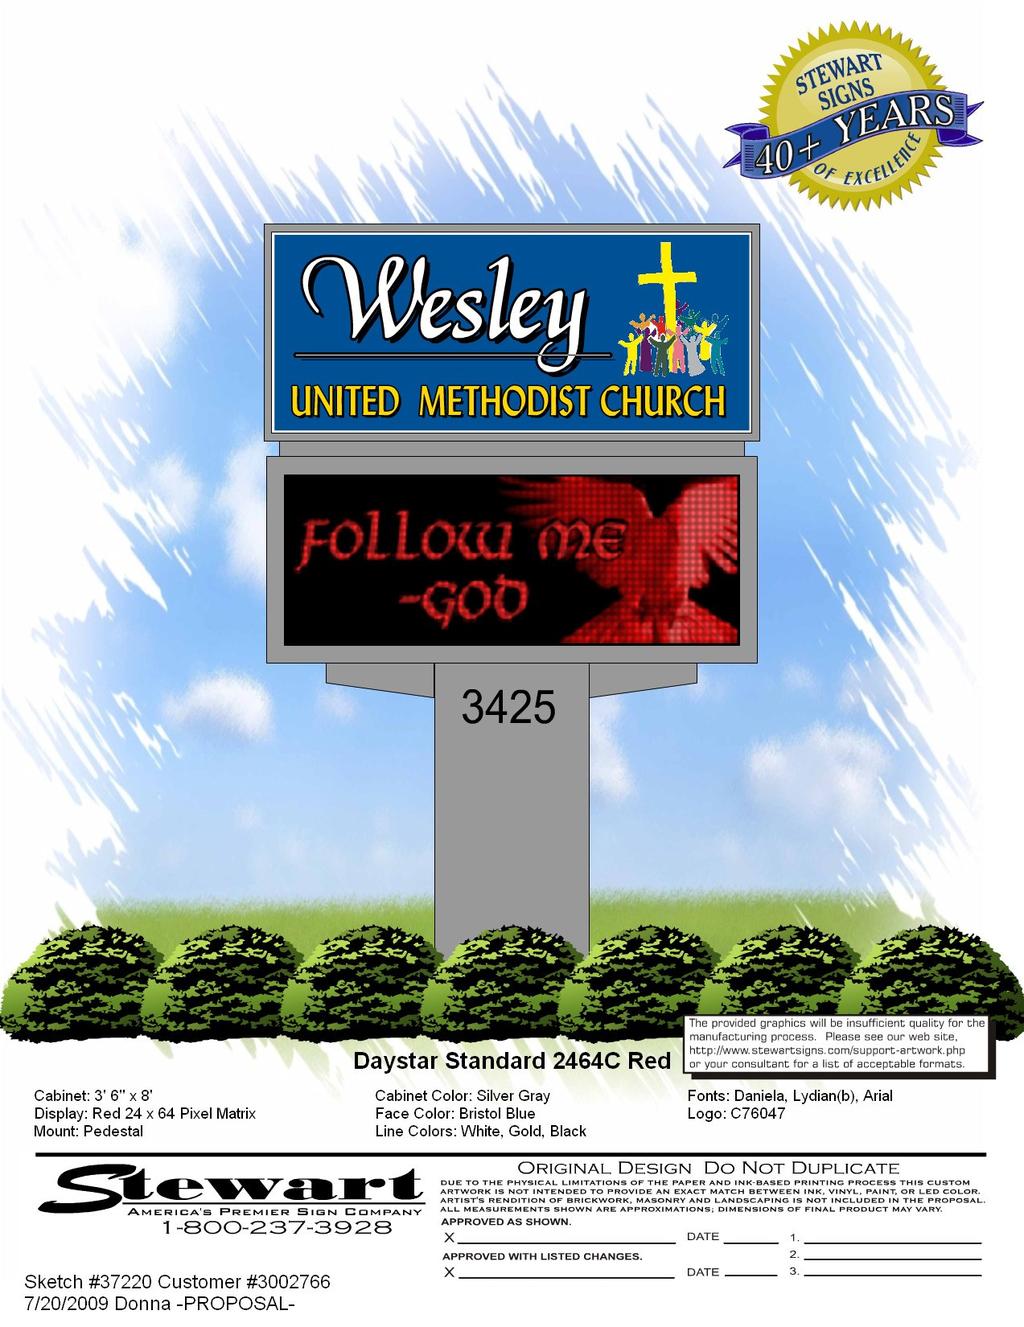 October, 2018 Volume 2, Issue 9 Wesley United Methodist Church Wesley Mission Statement To make disciples of Jesus Christ from all nations for the transformation of the world.